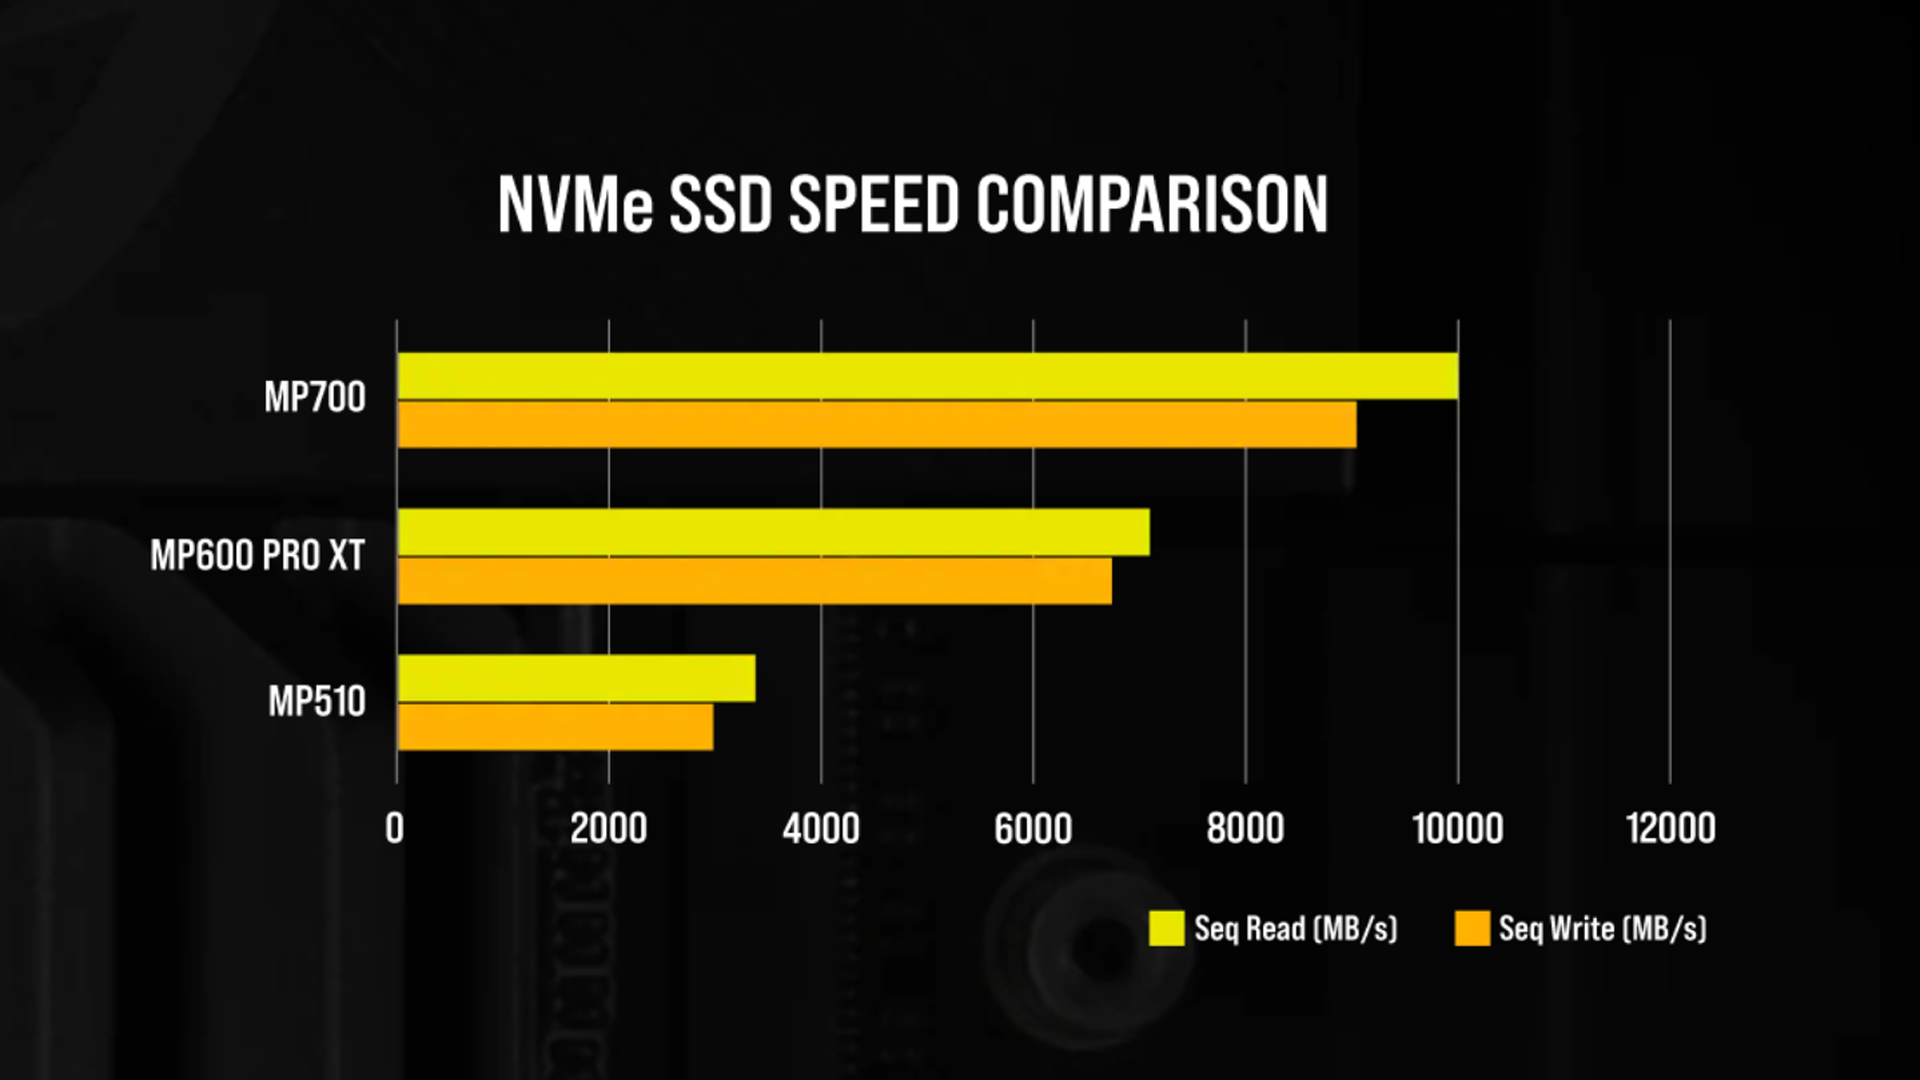 Bar chart comparing the read and write speeds of the Corsair MP700, MP600 Pro XT, and MP510 SSDs. The MP700 is significantly faster.